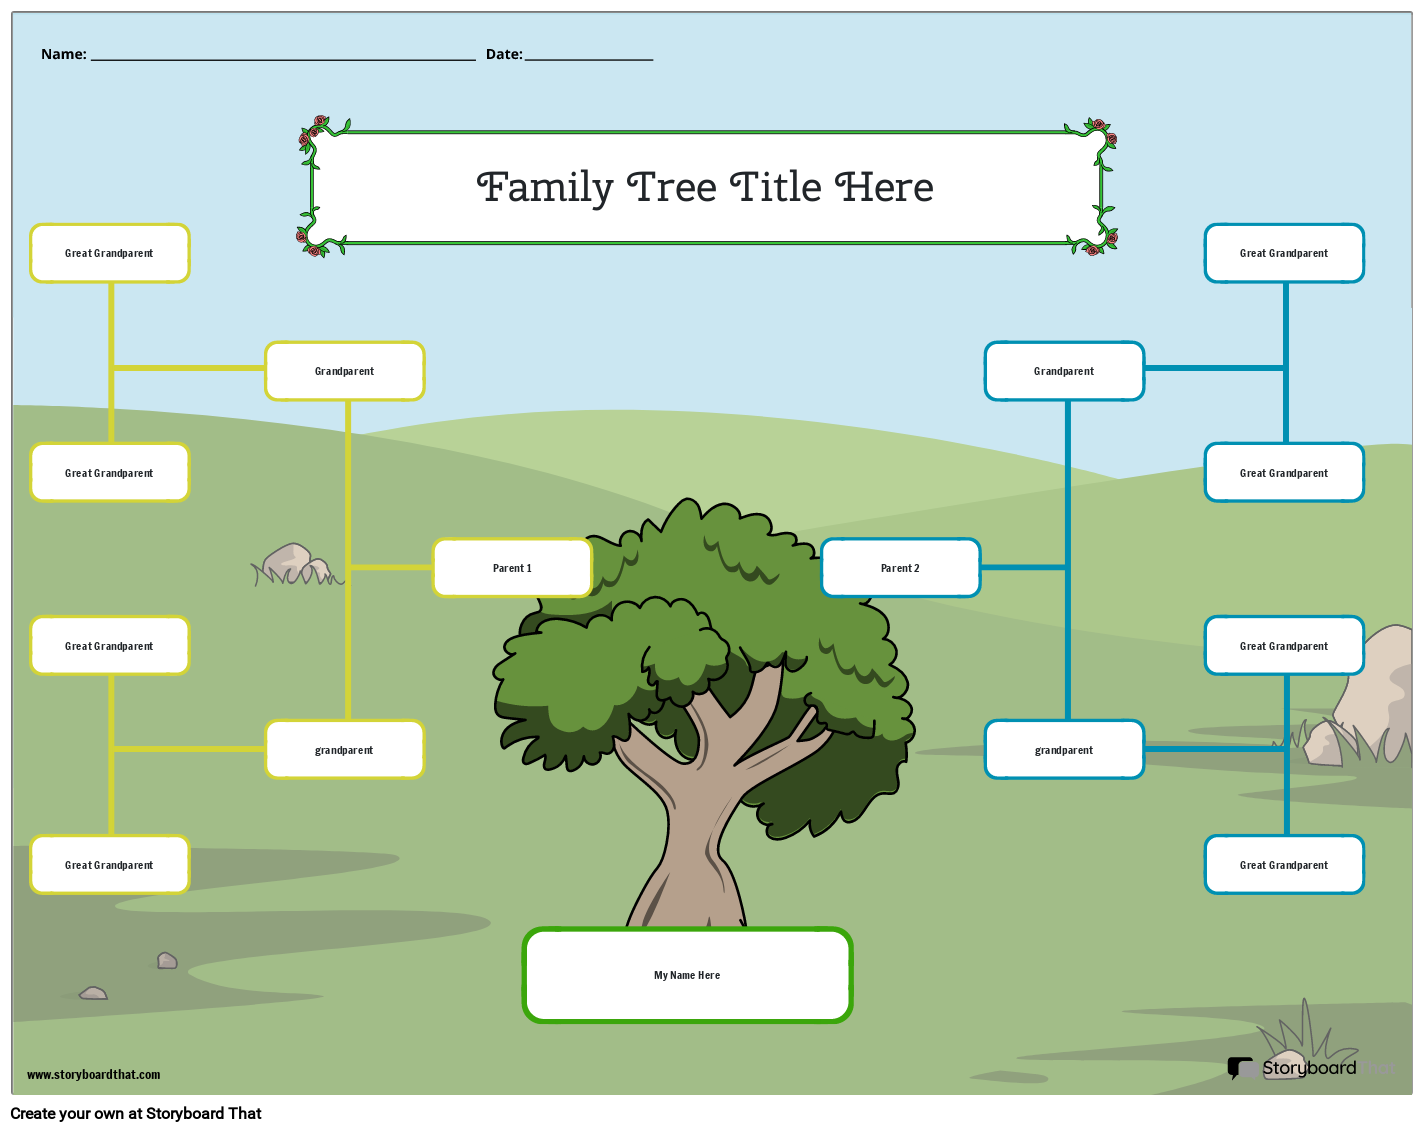 How To Make A Family Tree: Step-by-Step Guide & Online Tools - MyHeritage  Knowledge Base